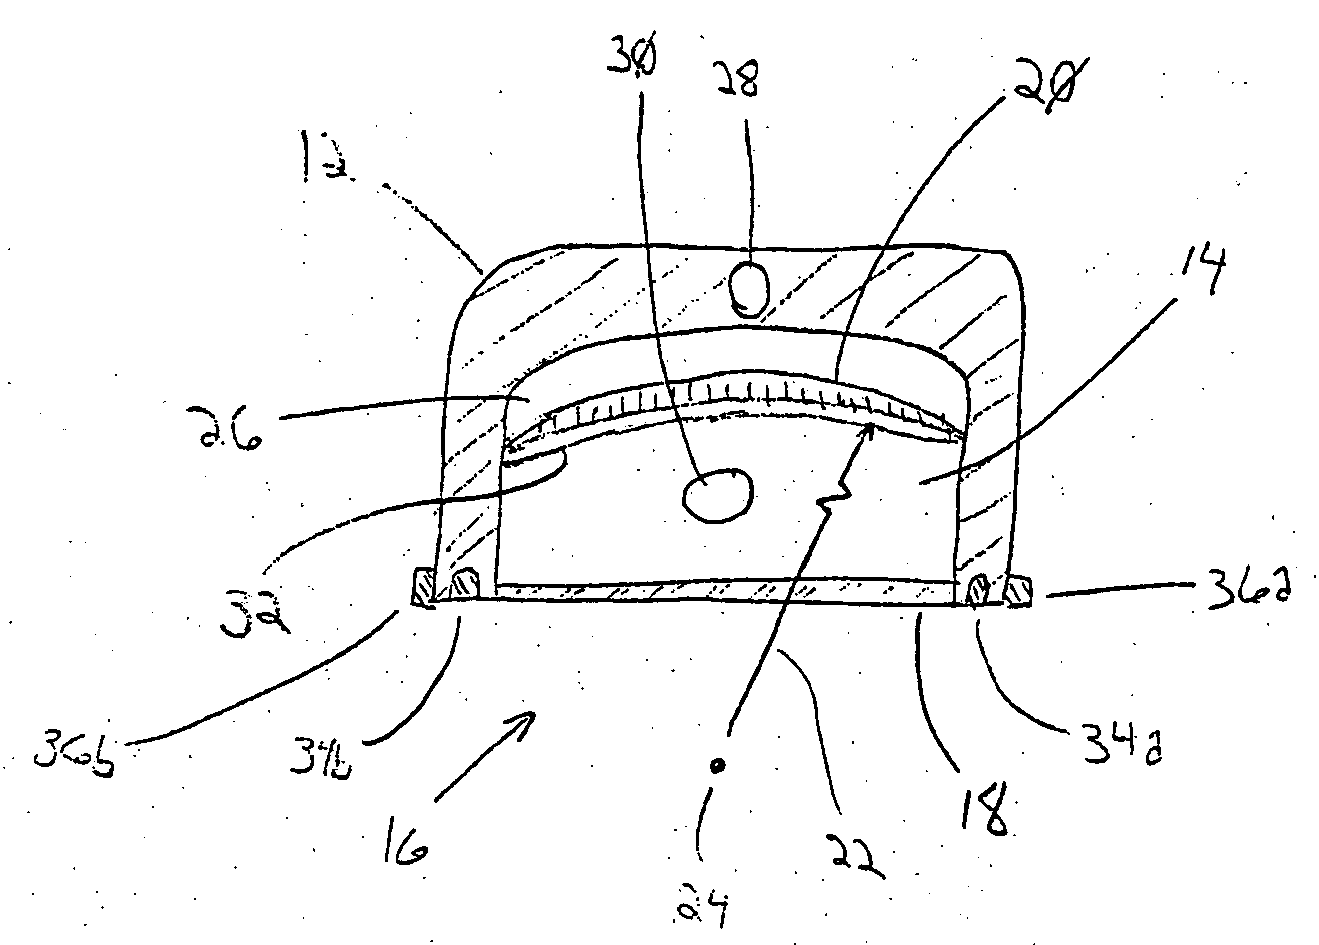 Applicator for creating linear lesions for the treatment of atrial fibrillation